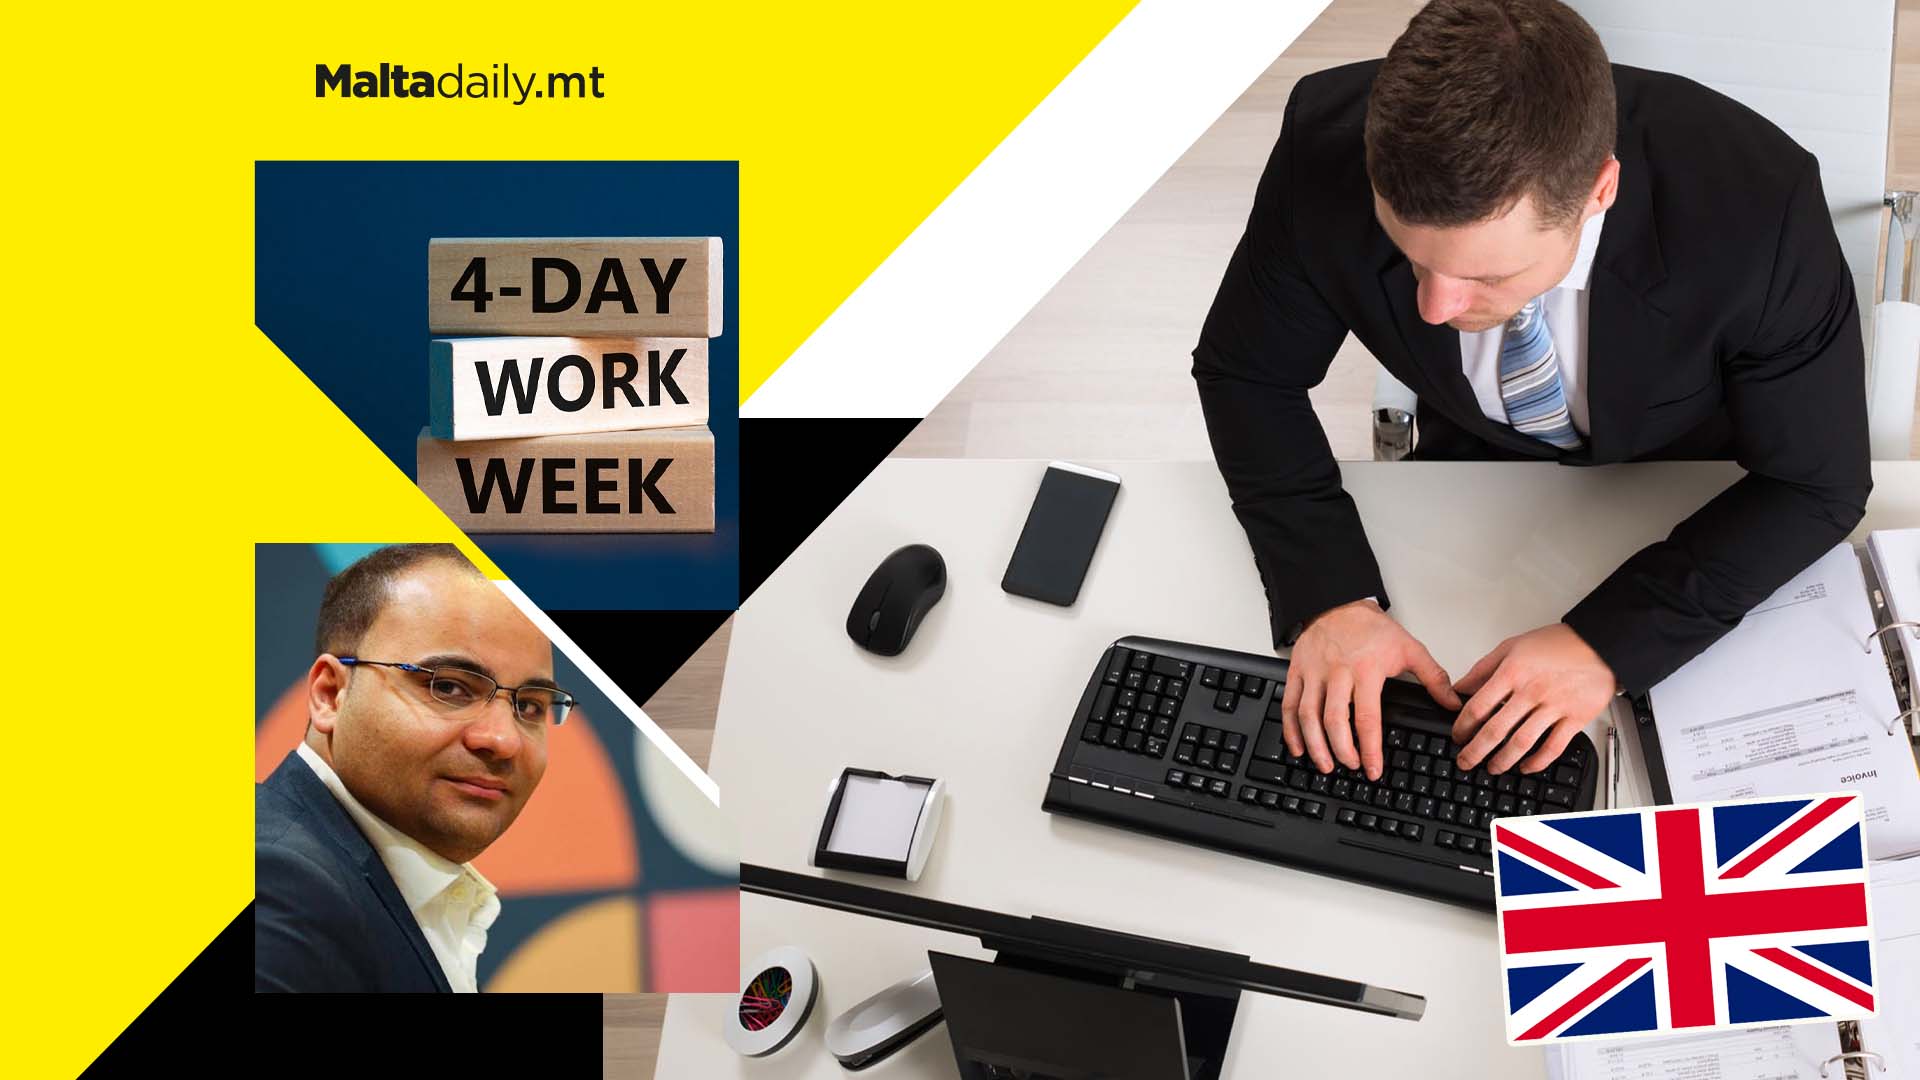 UK MPs might introduce four-day work week: still off the table for Malta